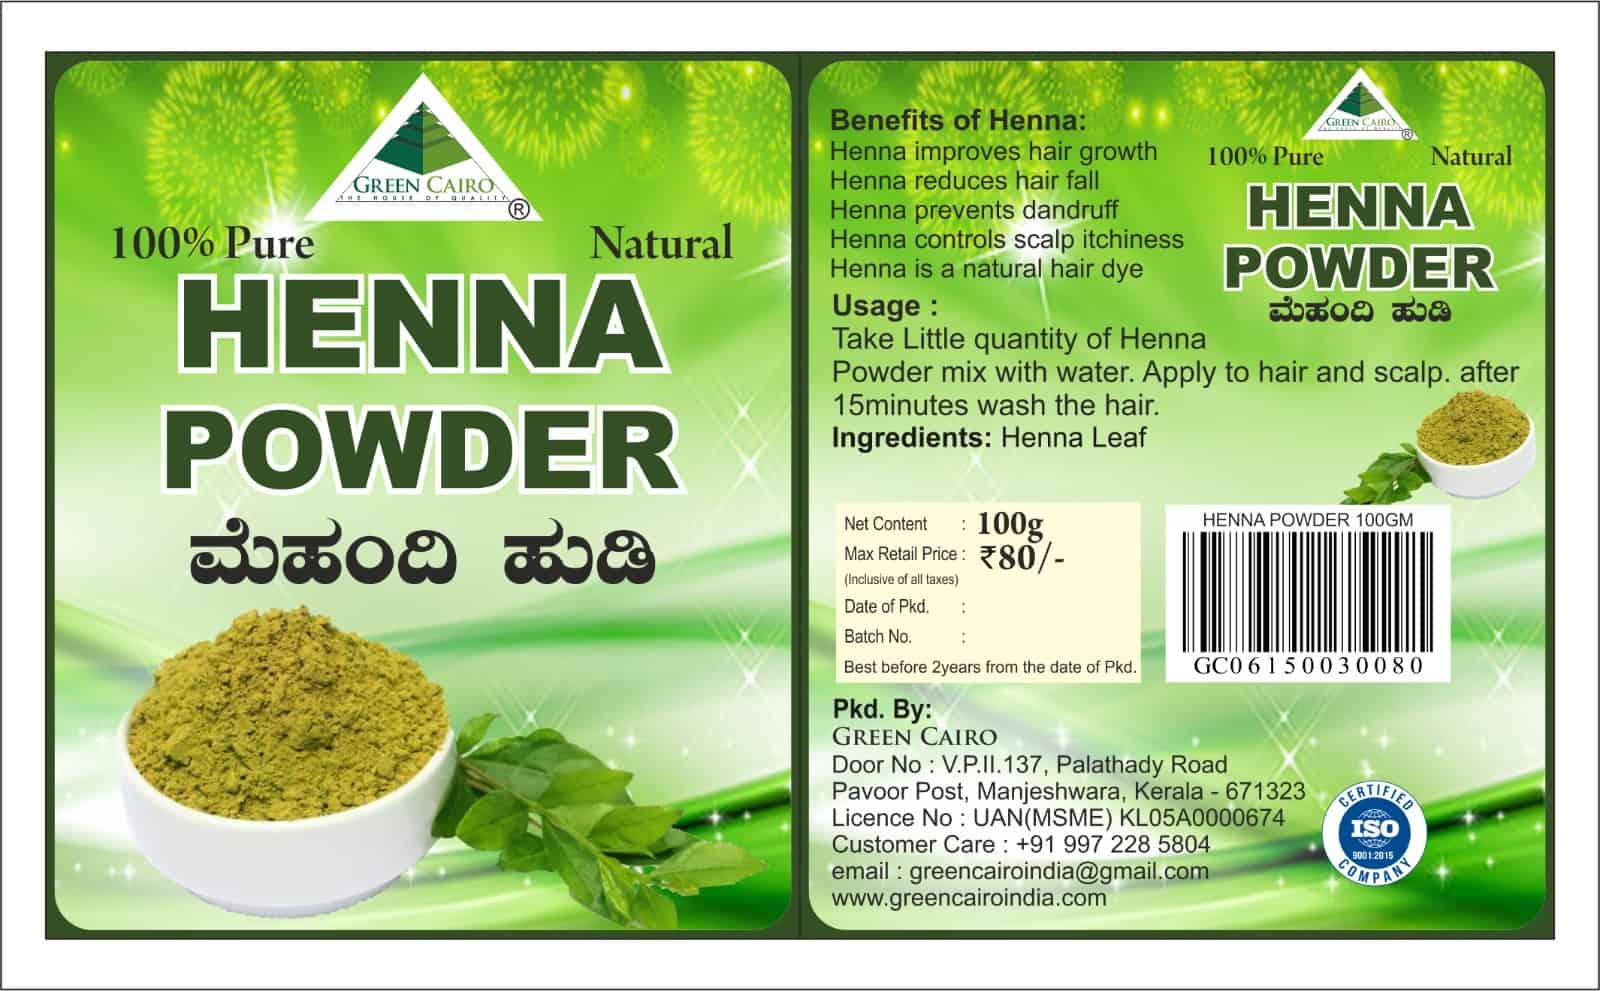 Henna Powder 100g for hair improves the texture of your hair - Green Cairo